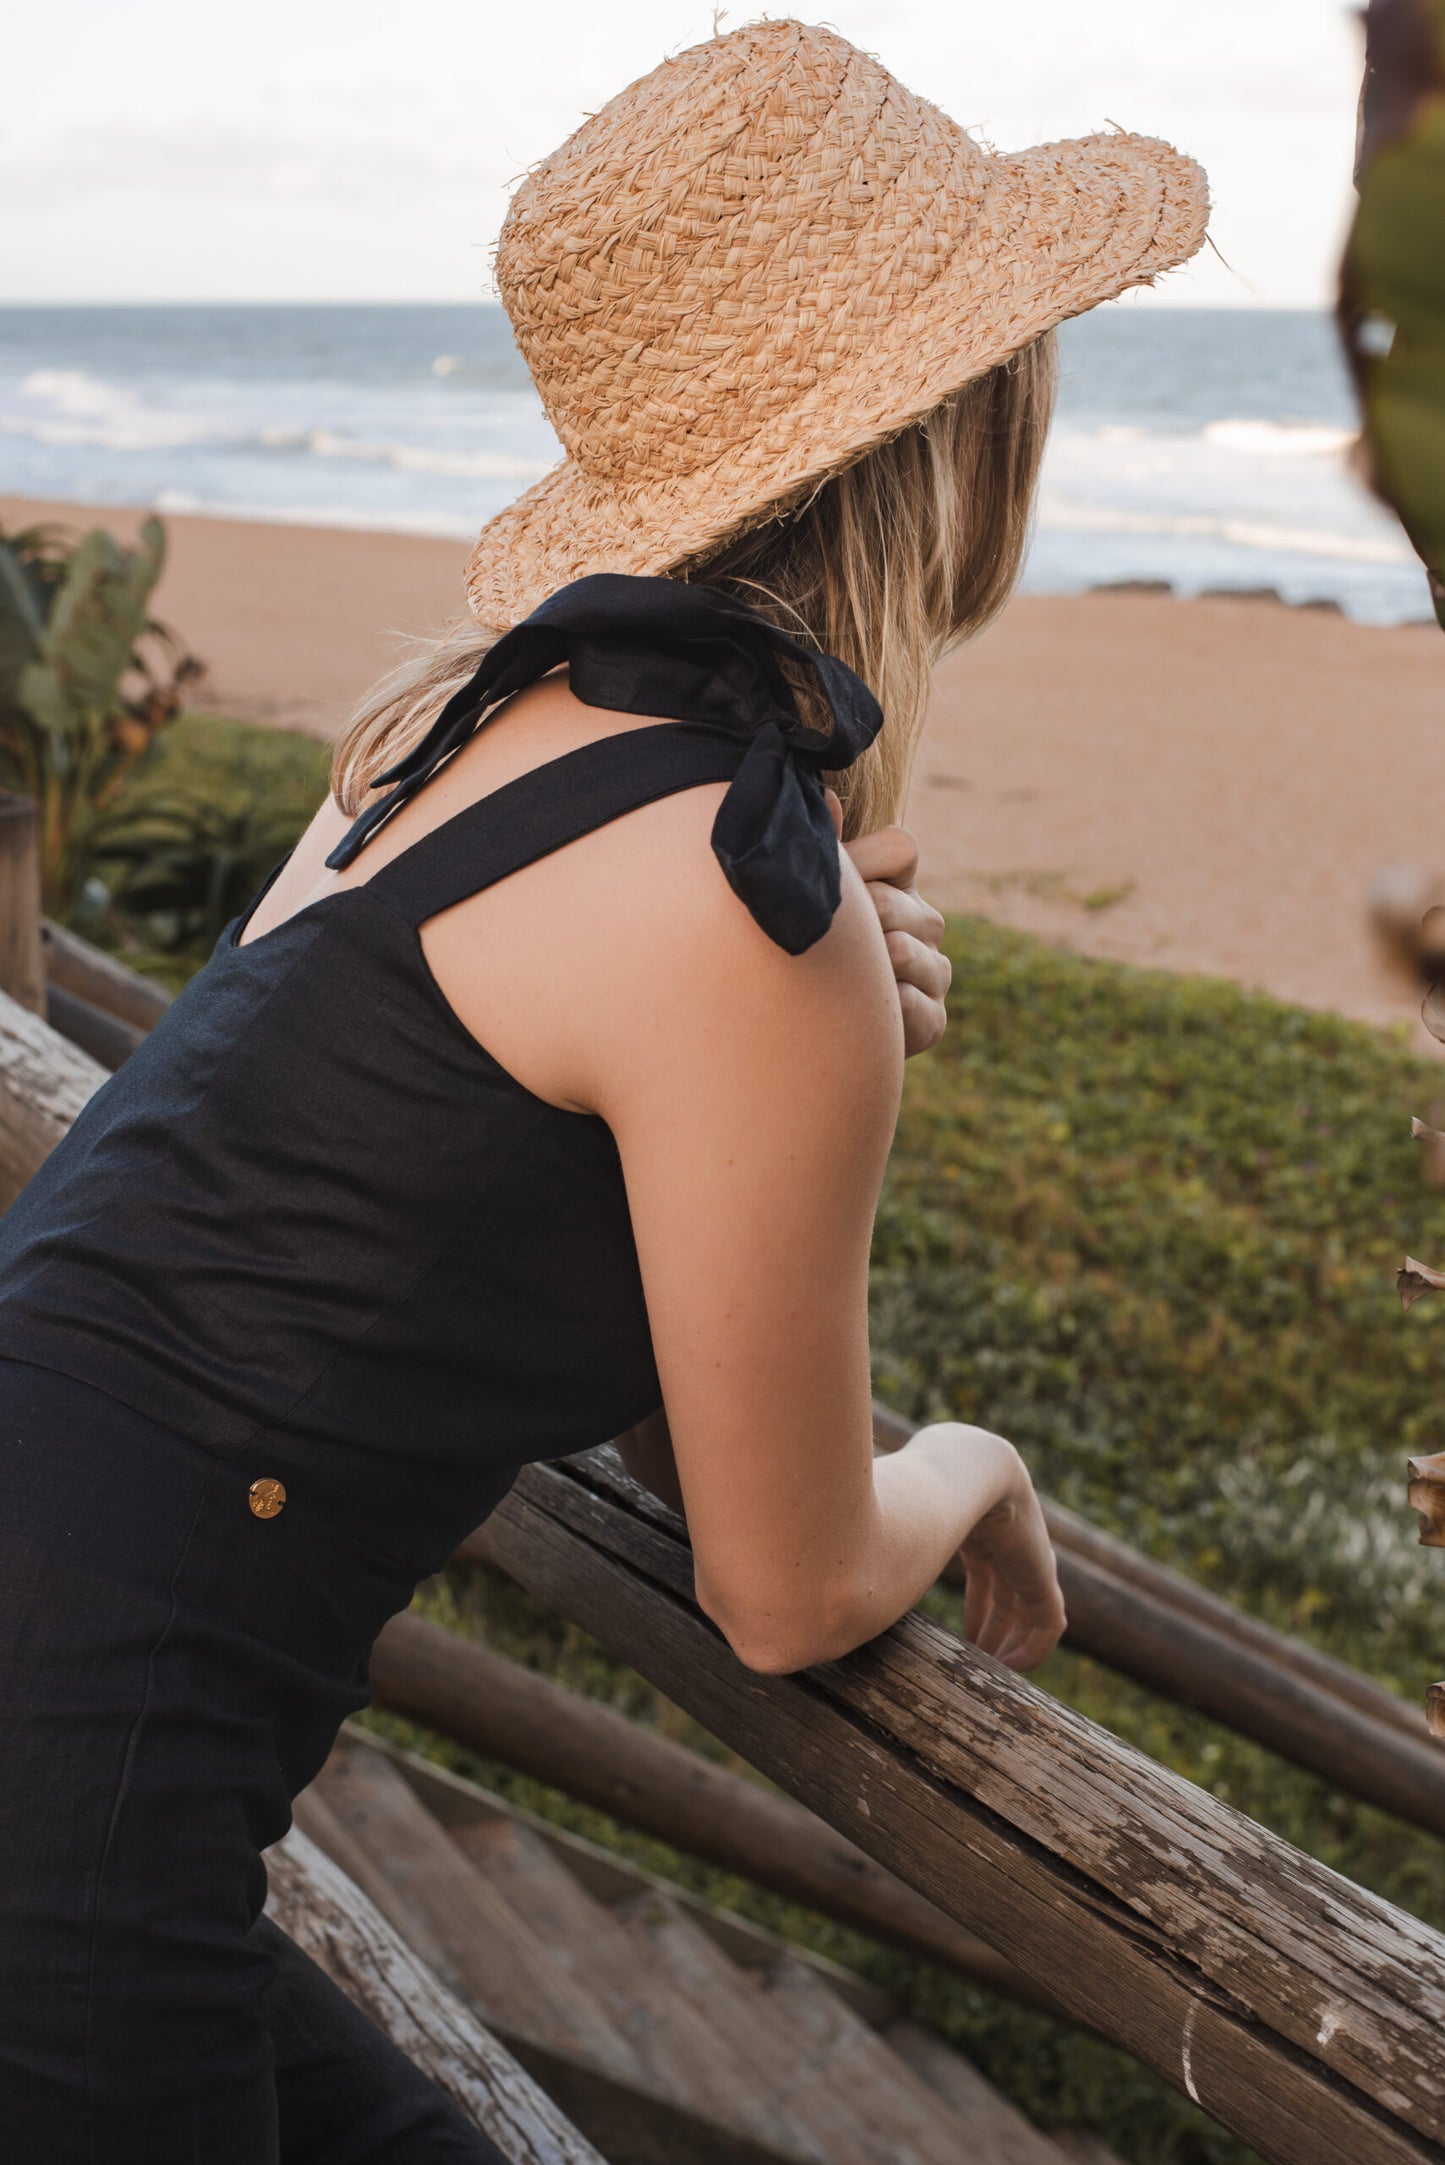 Woman wearing a bespoke linen black jumpsuit leans on boardwalk railing alongside the beach. She is wearing a straw hat and black jumpsuit and staring out into the distance deep in thought.